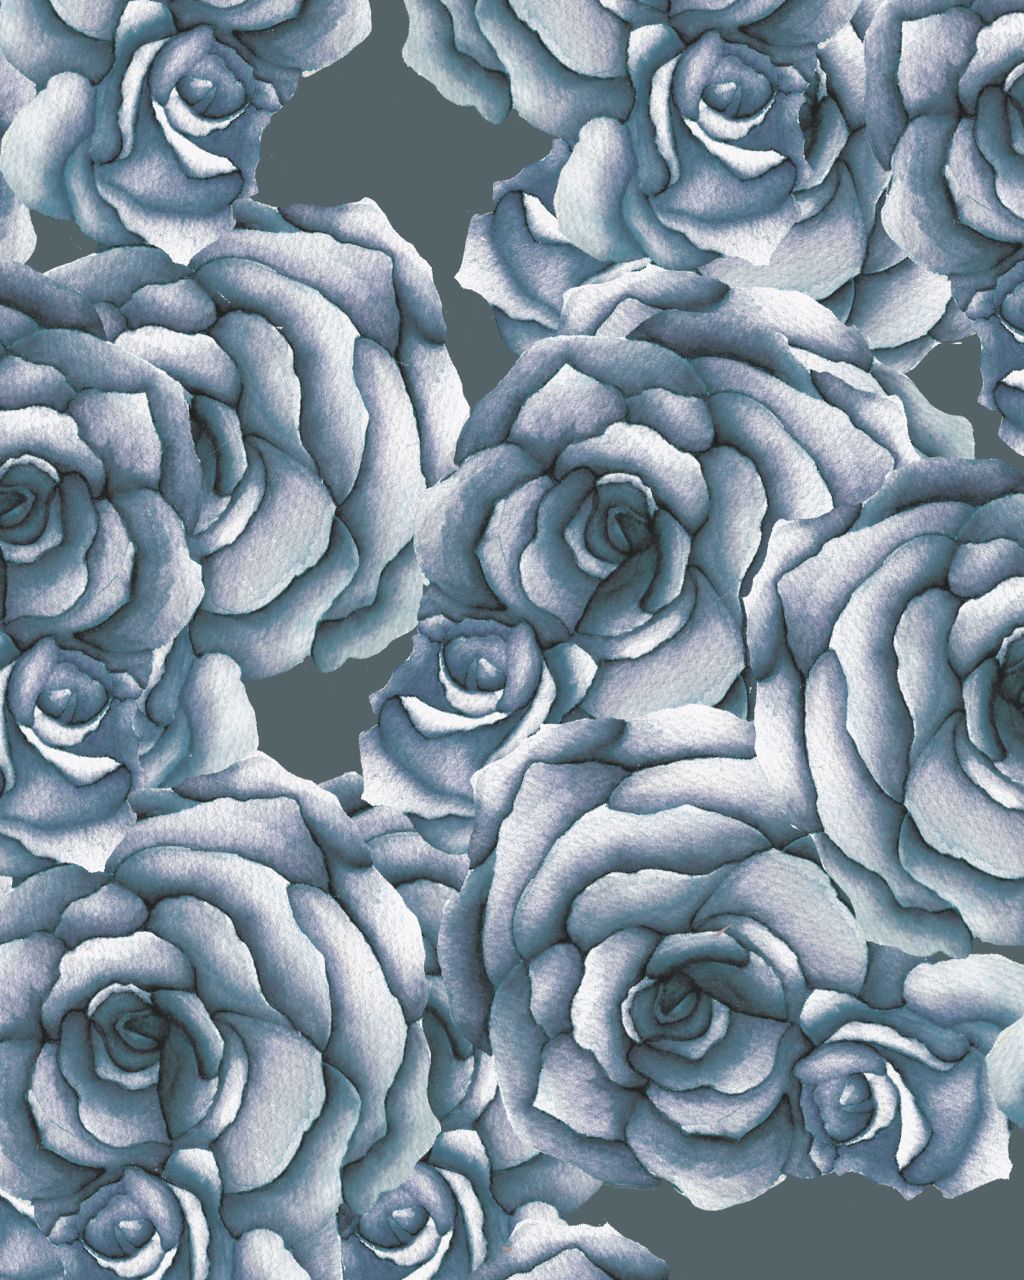 Candice Kaye experimented with a little whimsy as she developed her custom “Roses Are Blue” design for a client. “I like to capture what’s been done by Nature, but also make it more exciting by playing with scale and letting florals dominate in a design,” she says. 